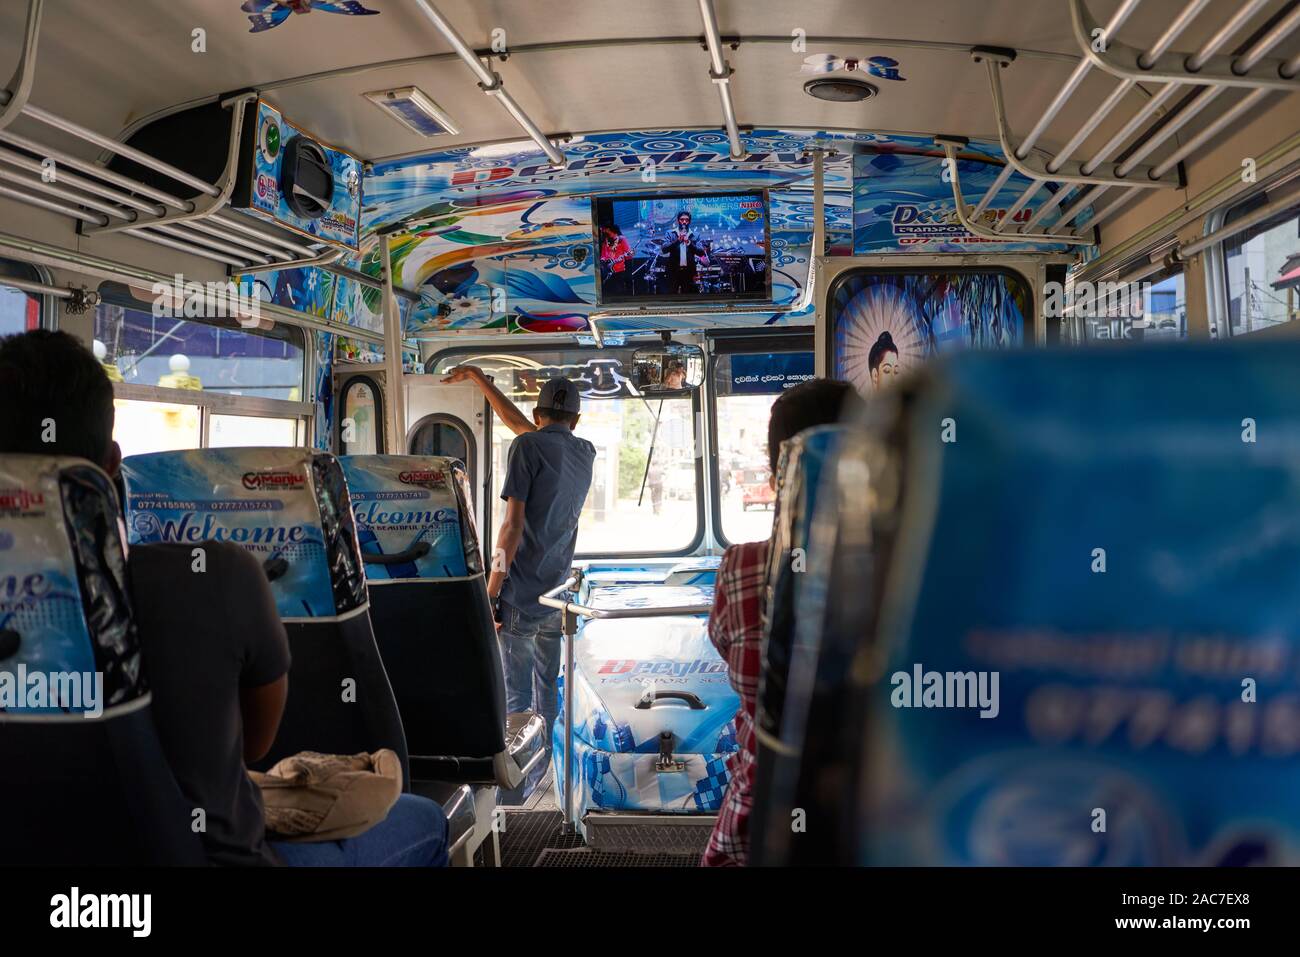 A typical public transport scene in Colombo, the conductor is keeping an eye out for potential passengers Stock Photo